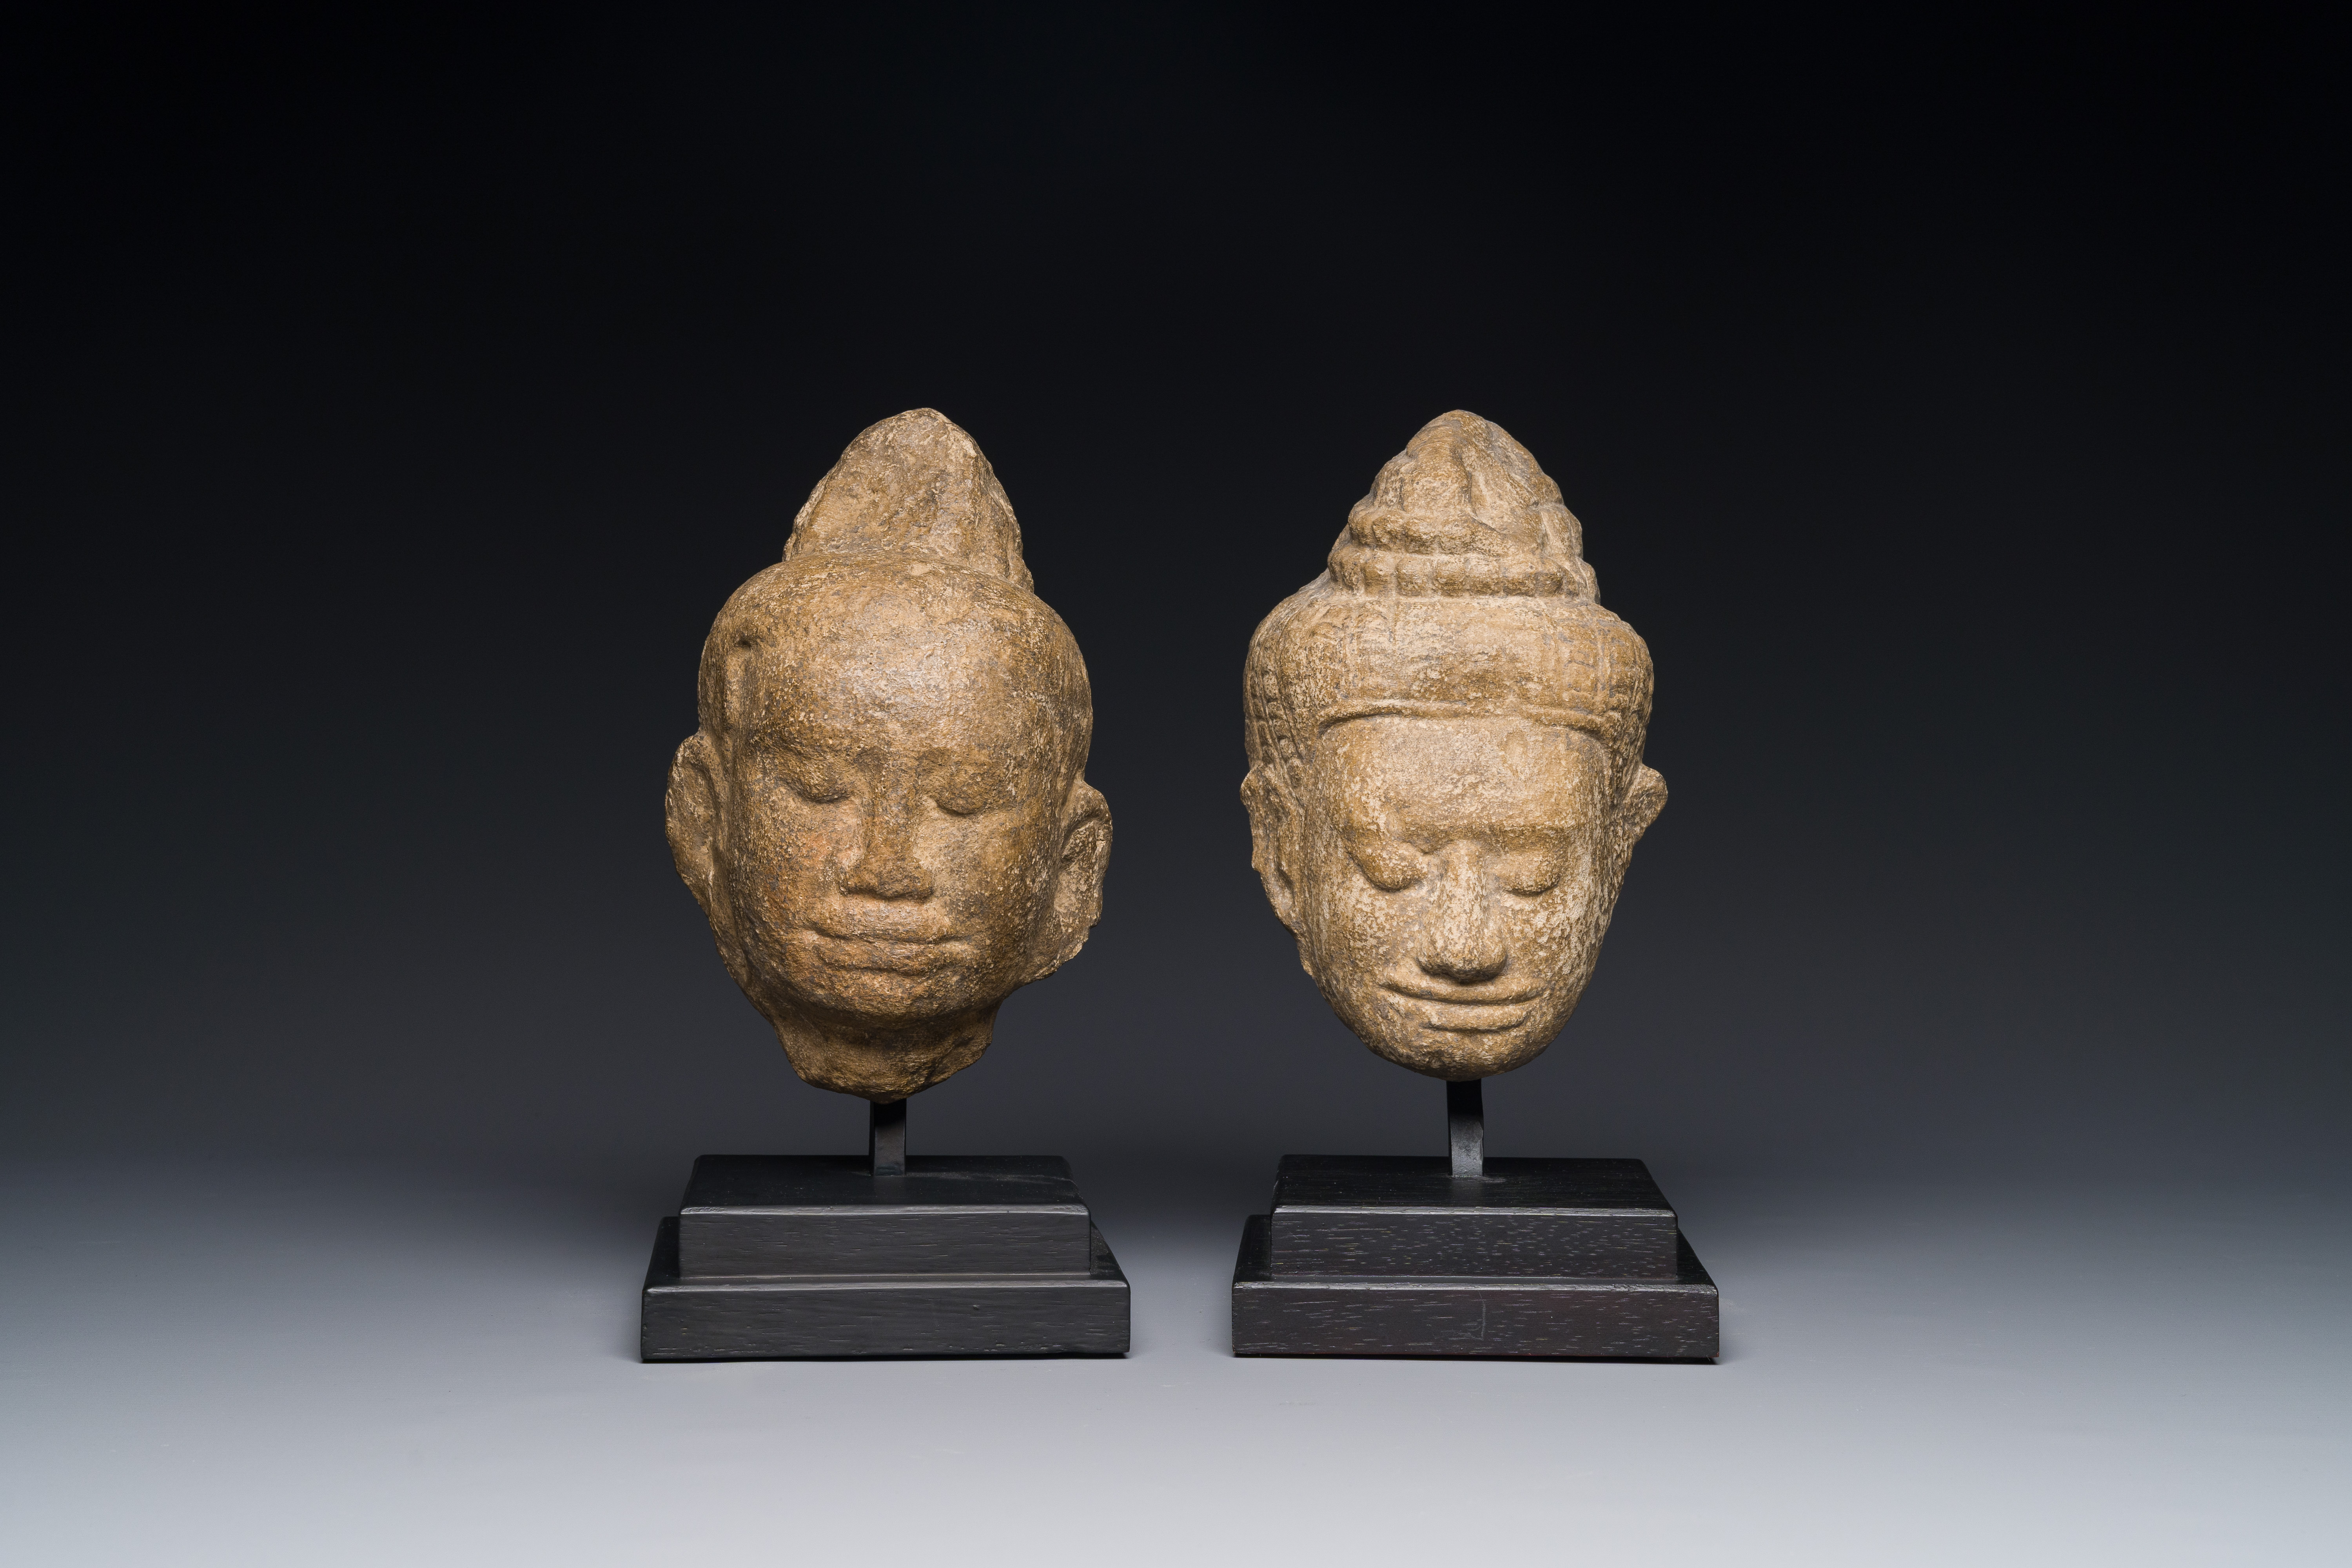 A stone head of Buddha and a sandstone khmer head of a deity, Bayon style, Cambodia, 12/13th C. - Image 4 of 12